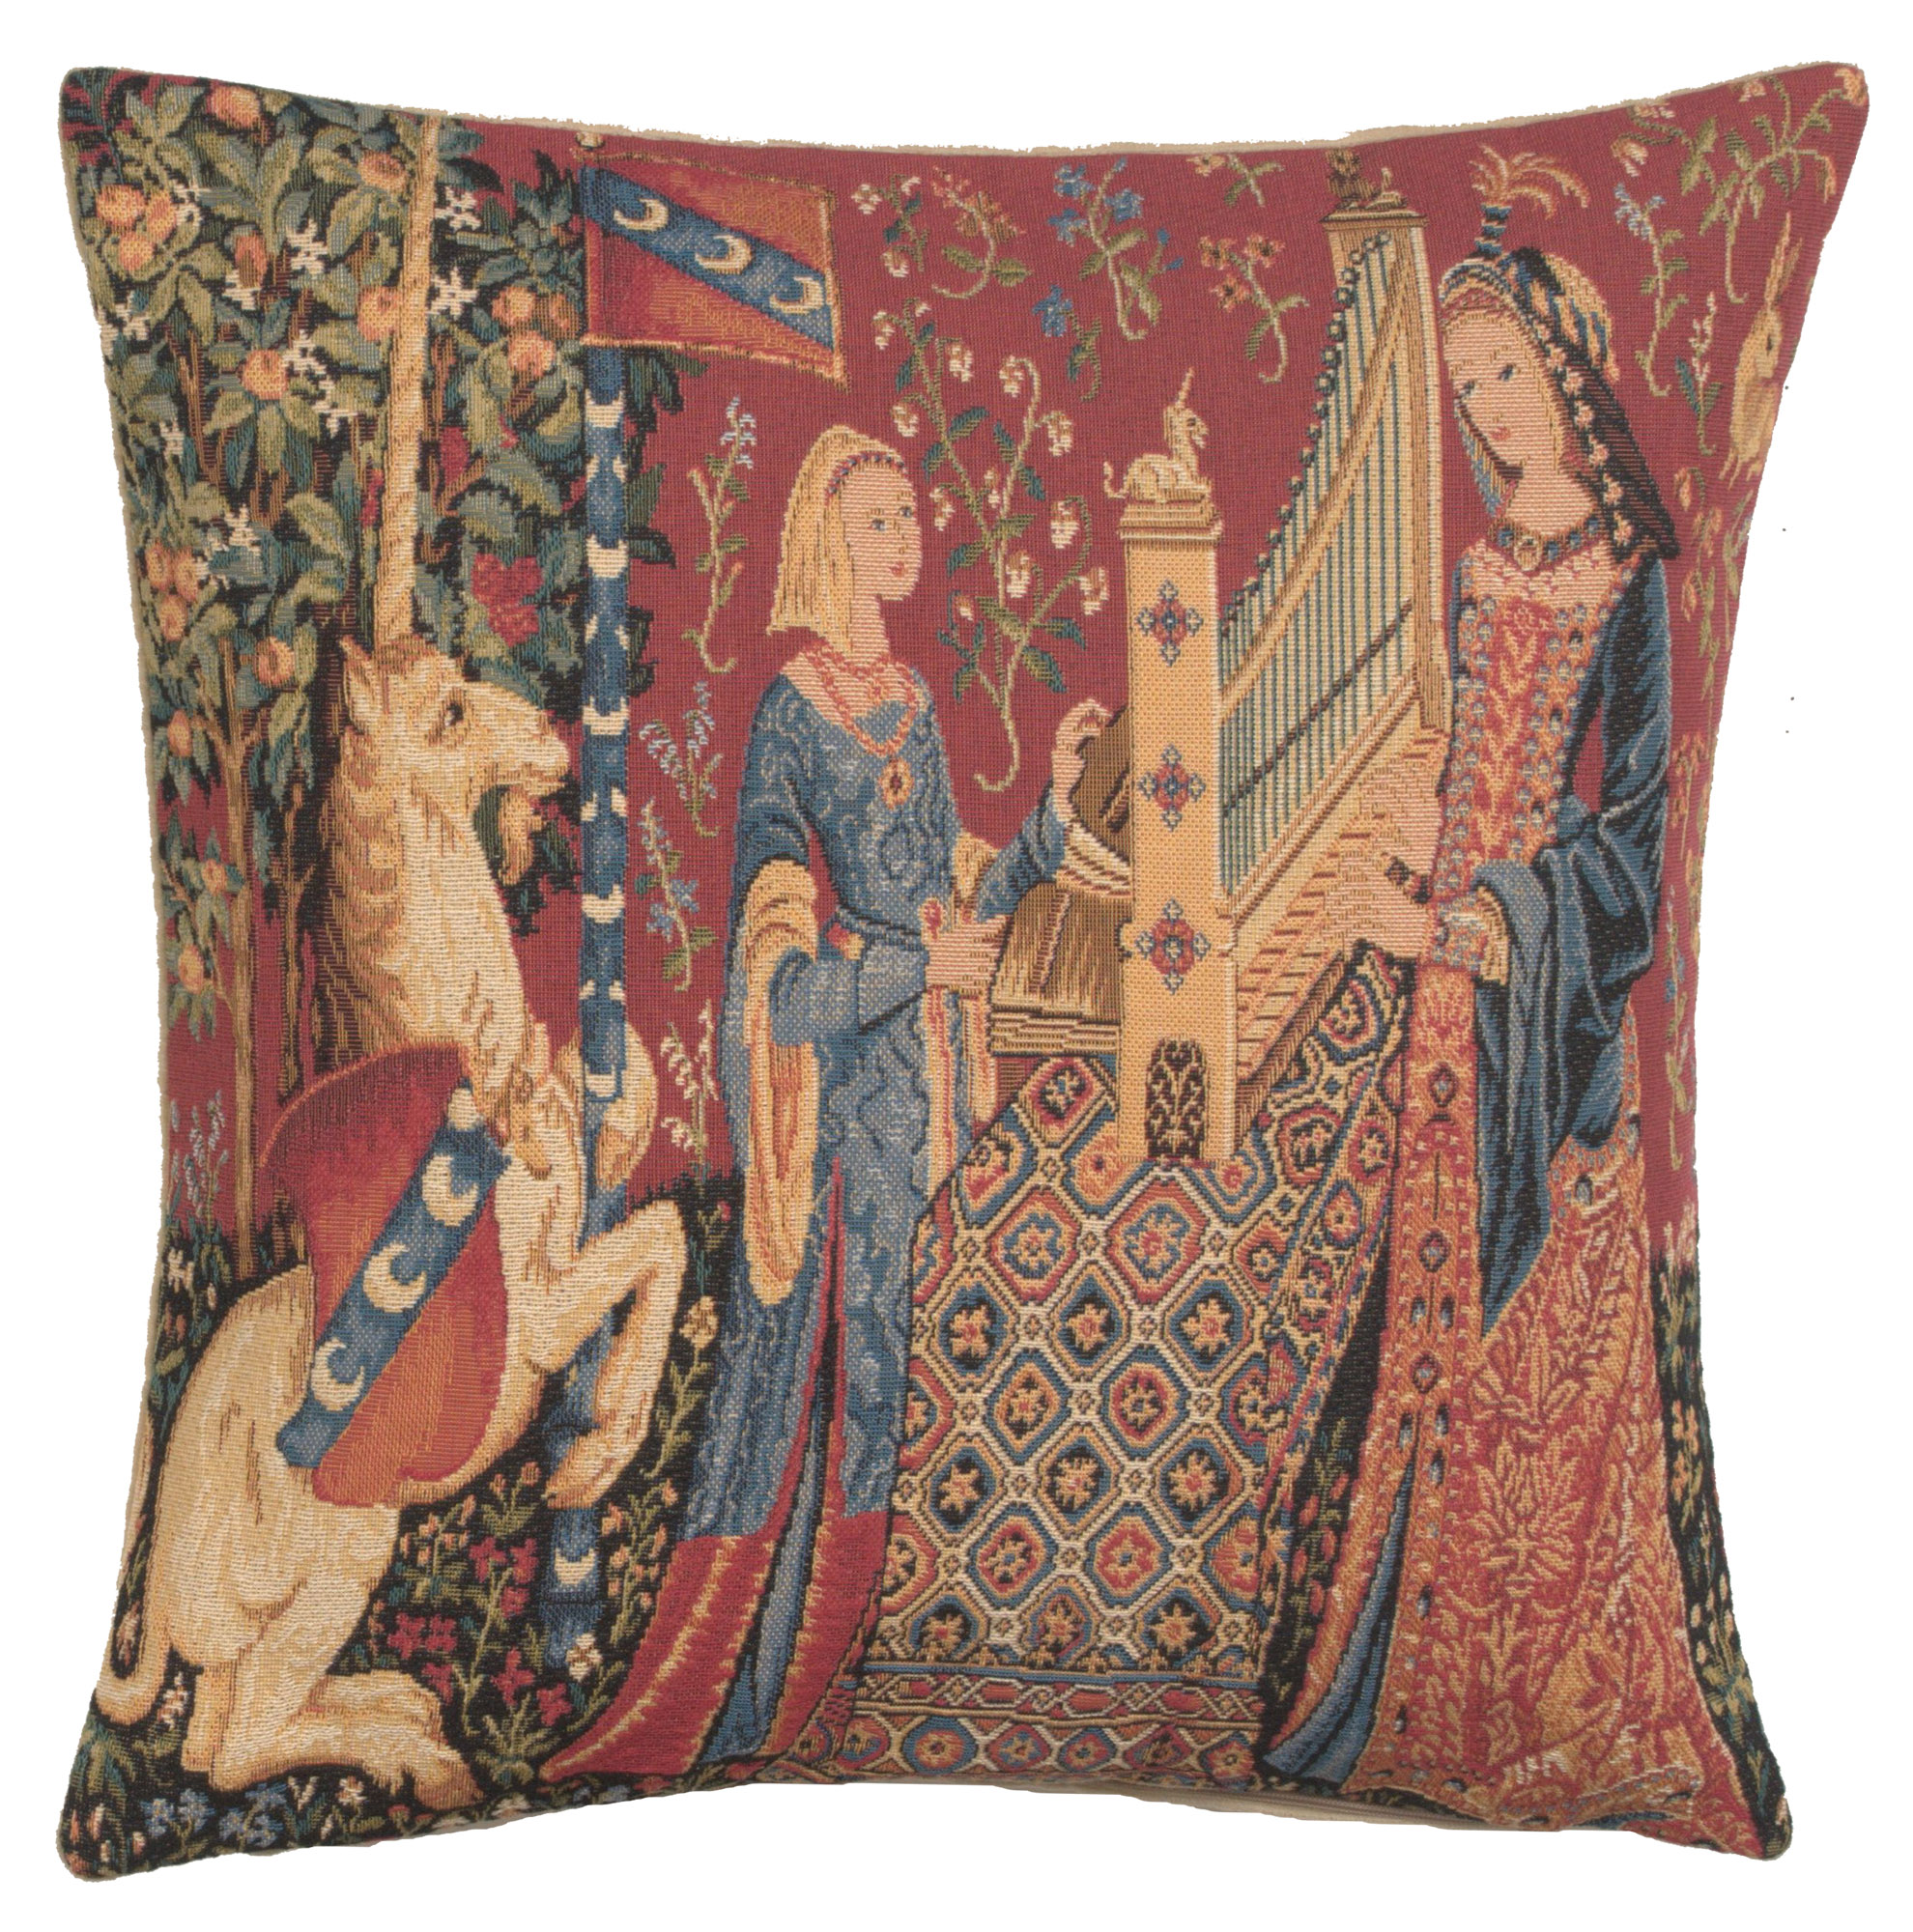 Medieval Hearing and Lady Unicorn Belgian Tapestry Designer Art Cushion Covers